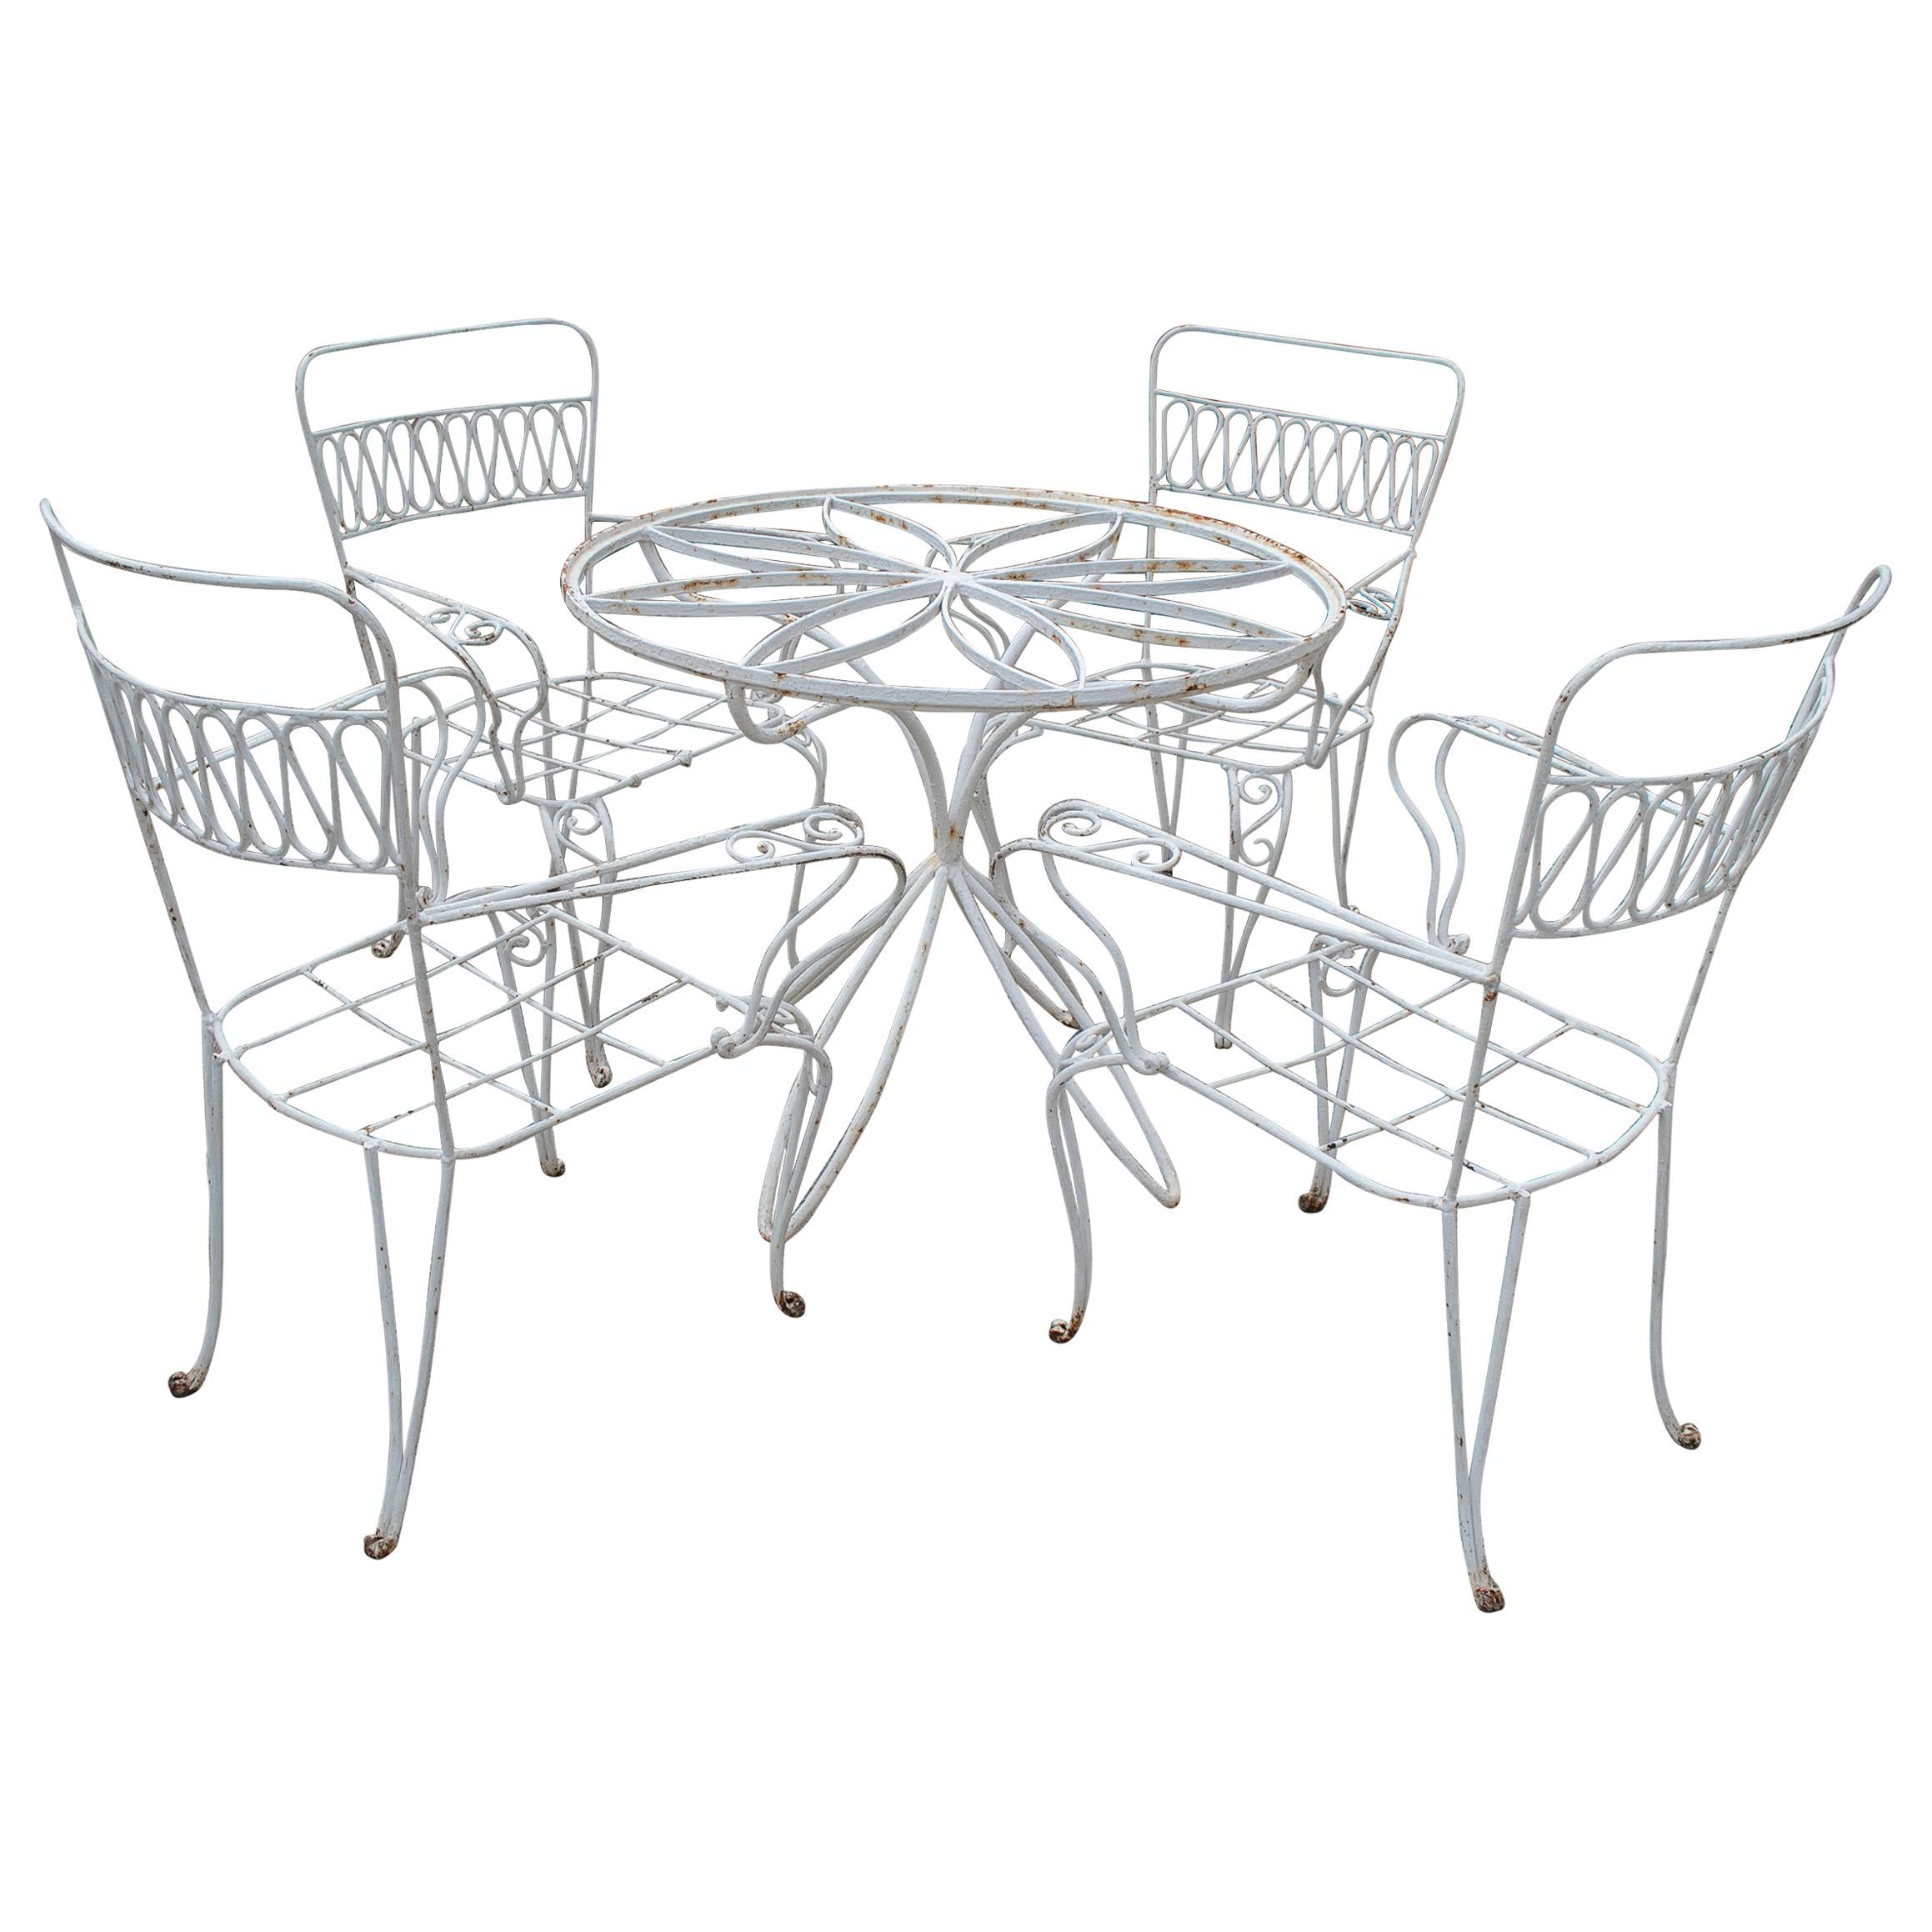 1970s Garden Set of Iron Circular Table and Four Chairs